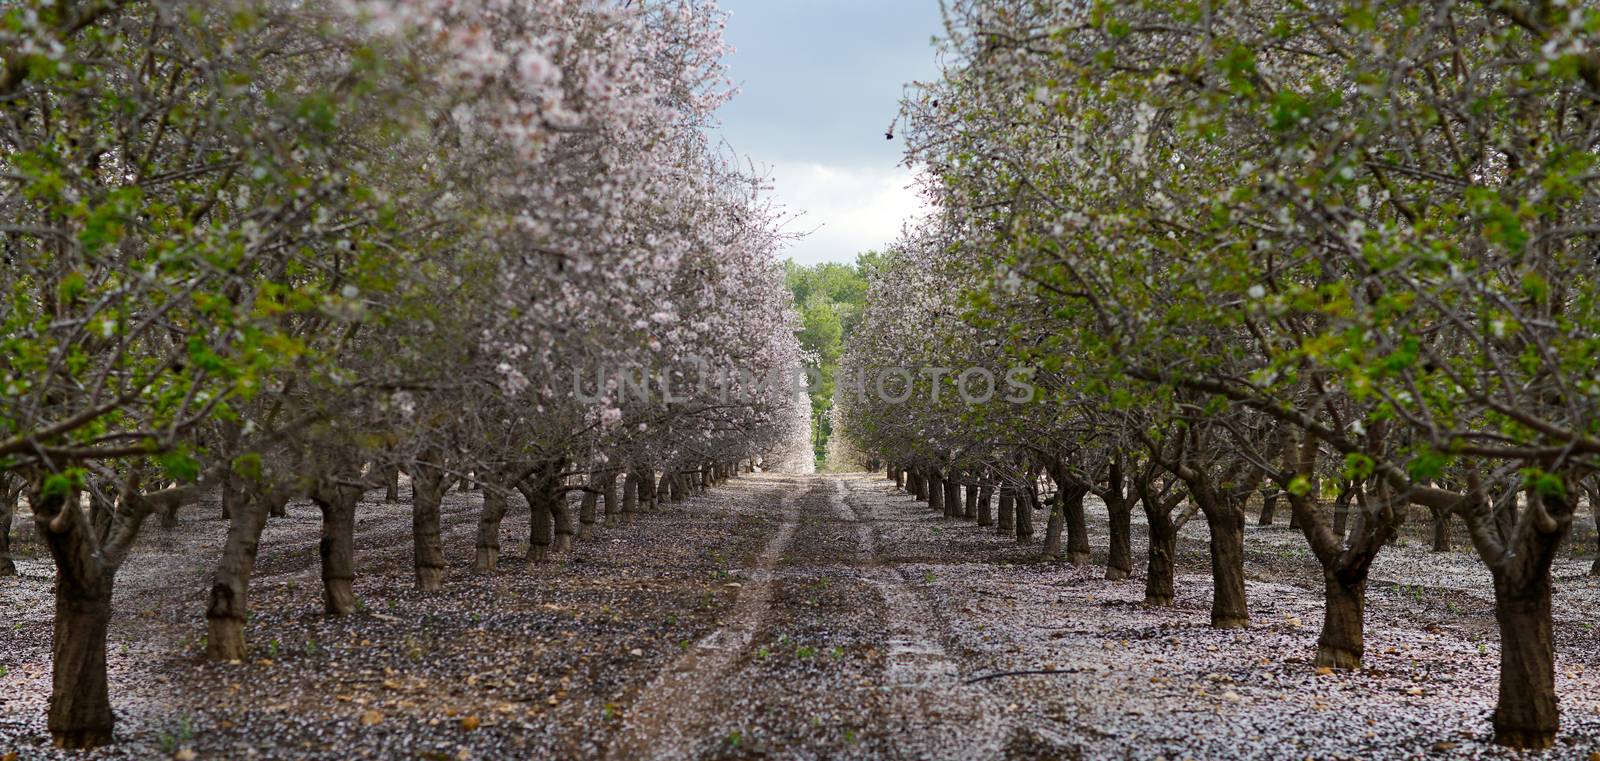 agricultural landscape, blooming garden with fruit trees